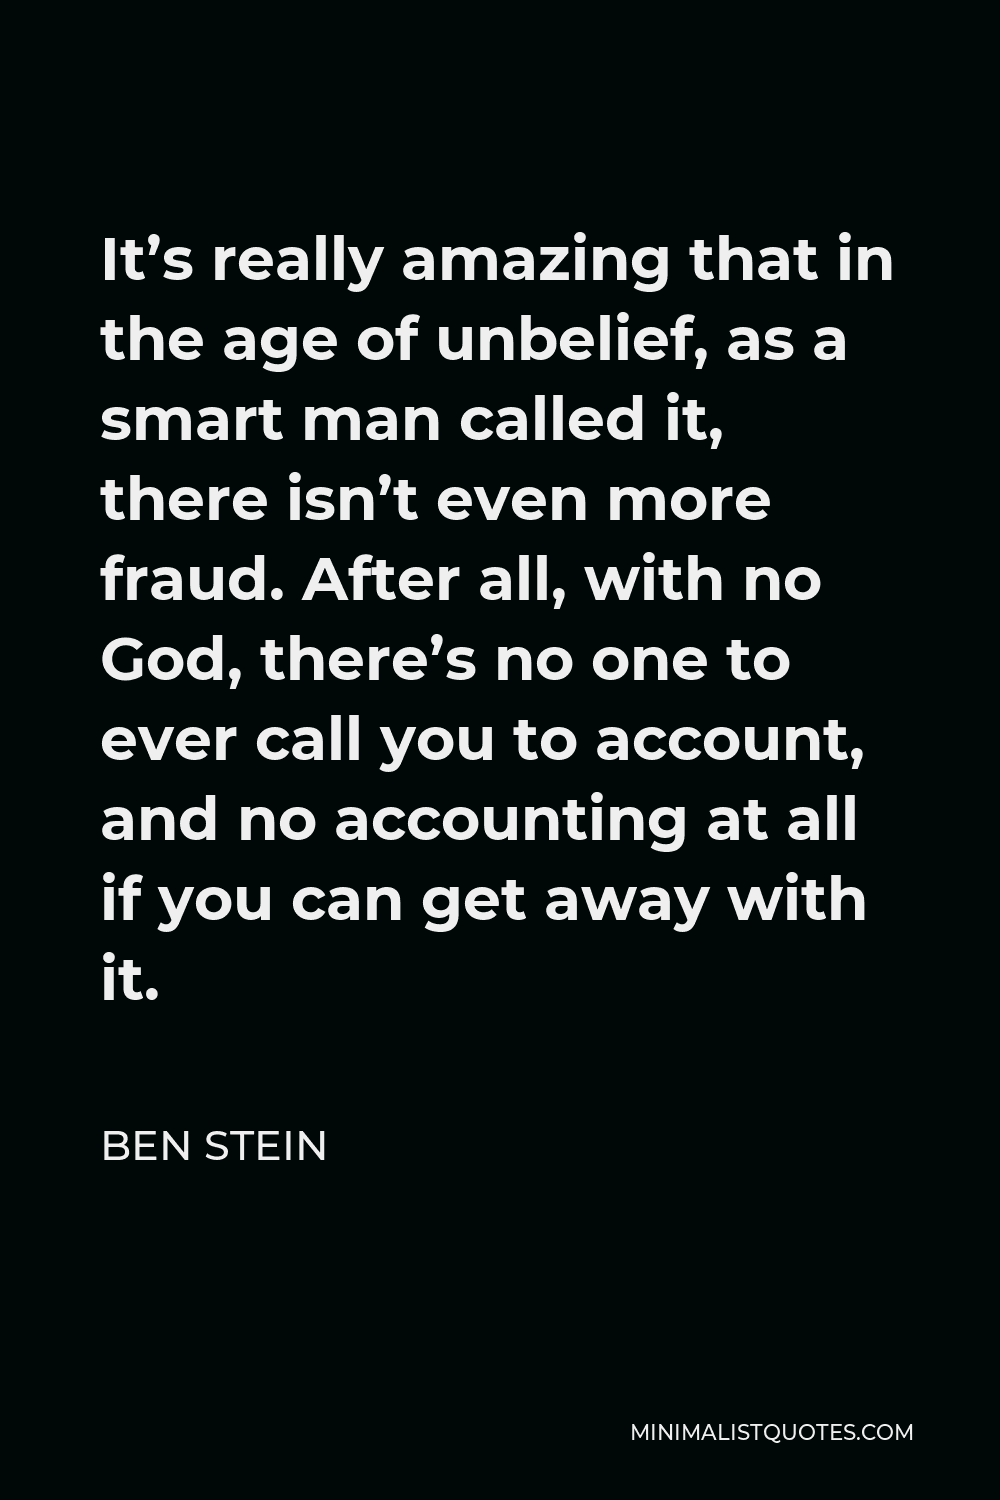 Ben Stein Quote - It’s really amazing that in the age of unbelief, as a smart man called it, there isn’t even more fraud. After all, with no God, there’s no one to ever call you to account, and no accounting at all if you can get away with it.